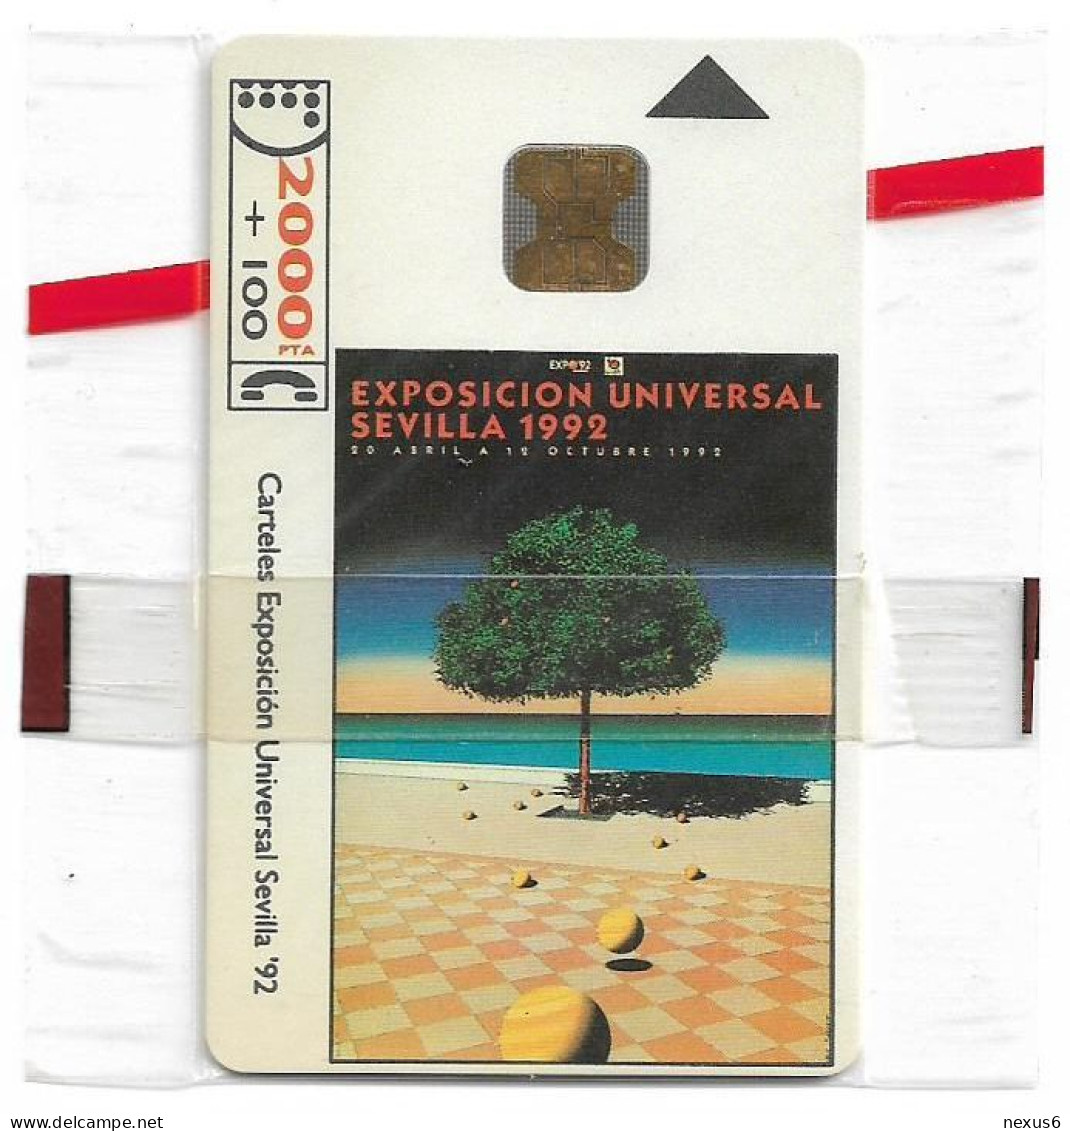 Spain - Telefonica - Expo Sevilla '92 - G. Billout - CP-003 - With FMT Logo, 04.1992, 2.000PTA, 30.000ex, NSB - Herdenkingsreclame